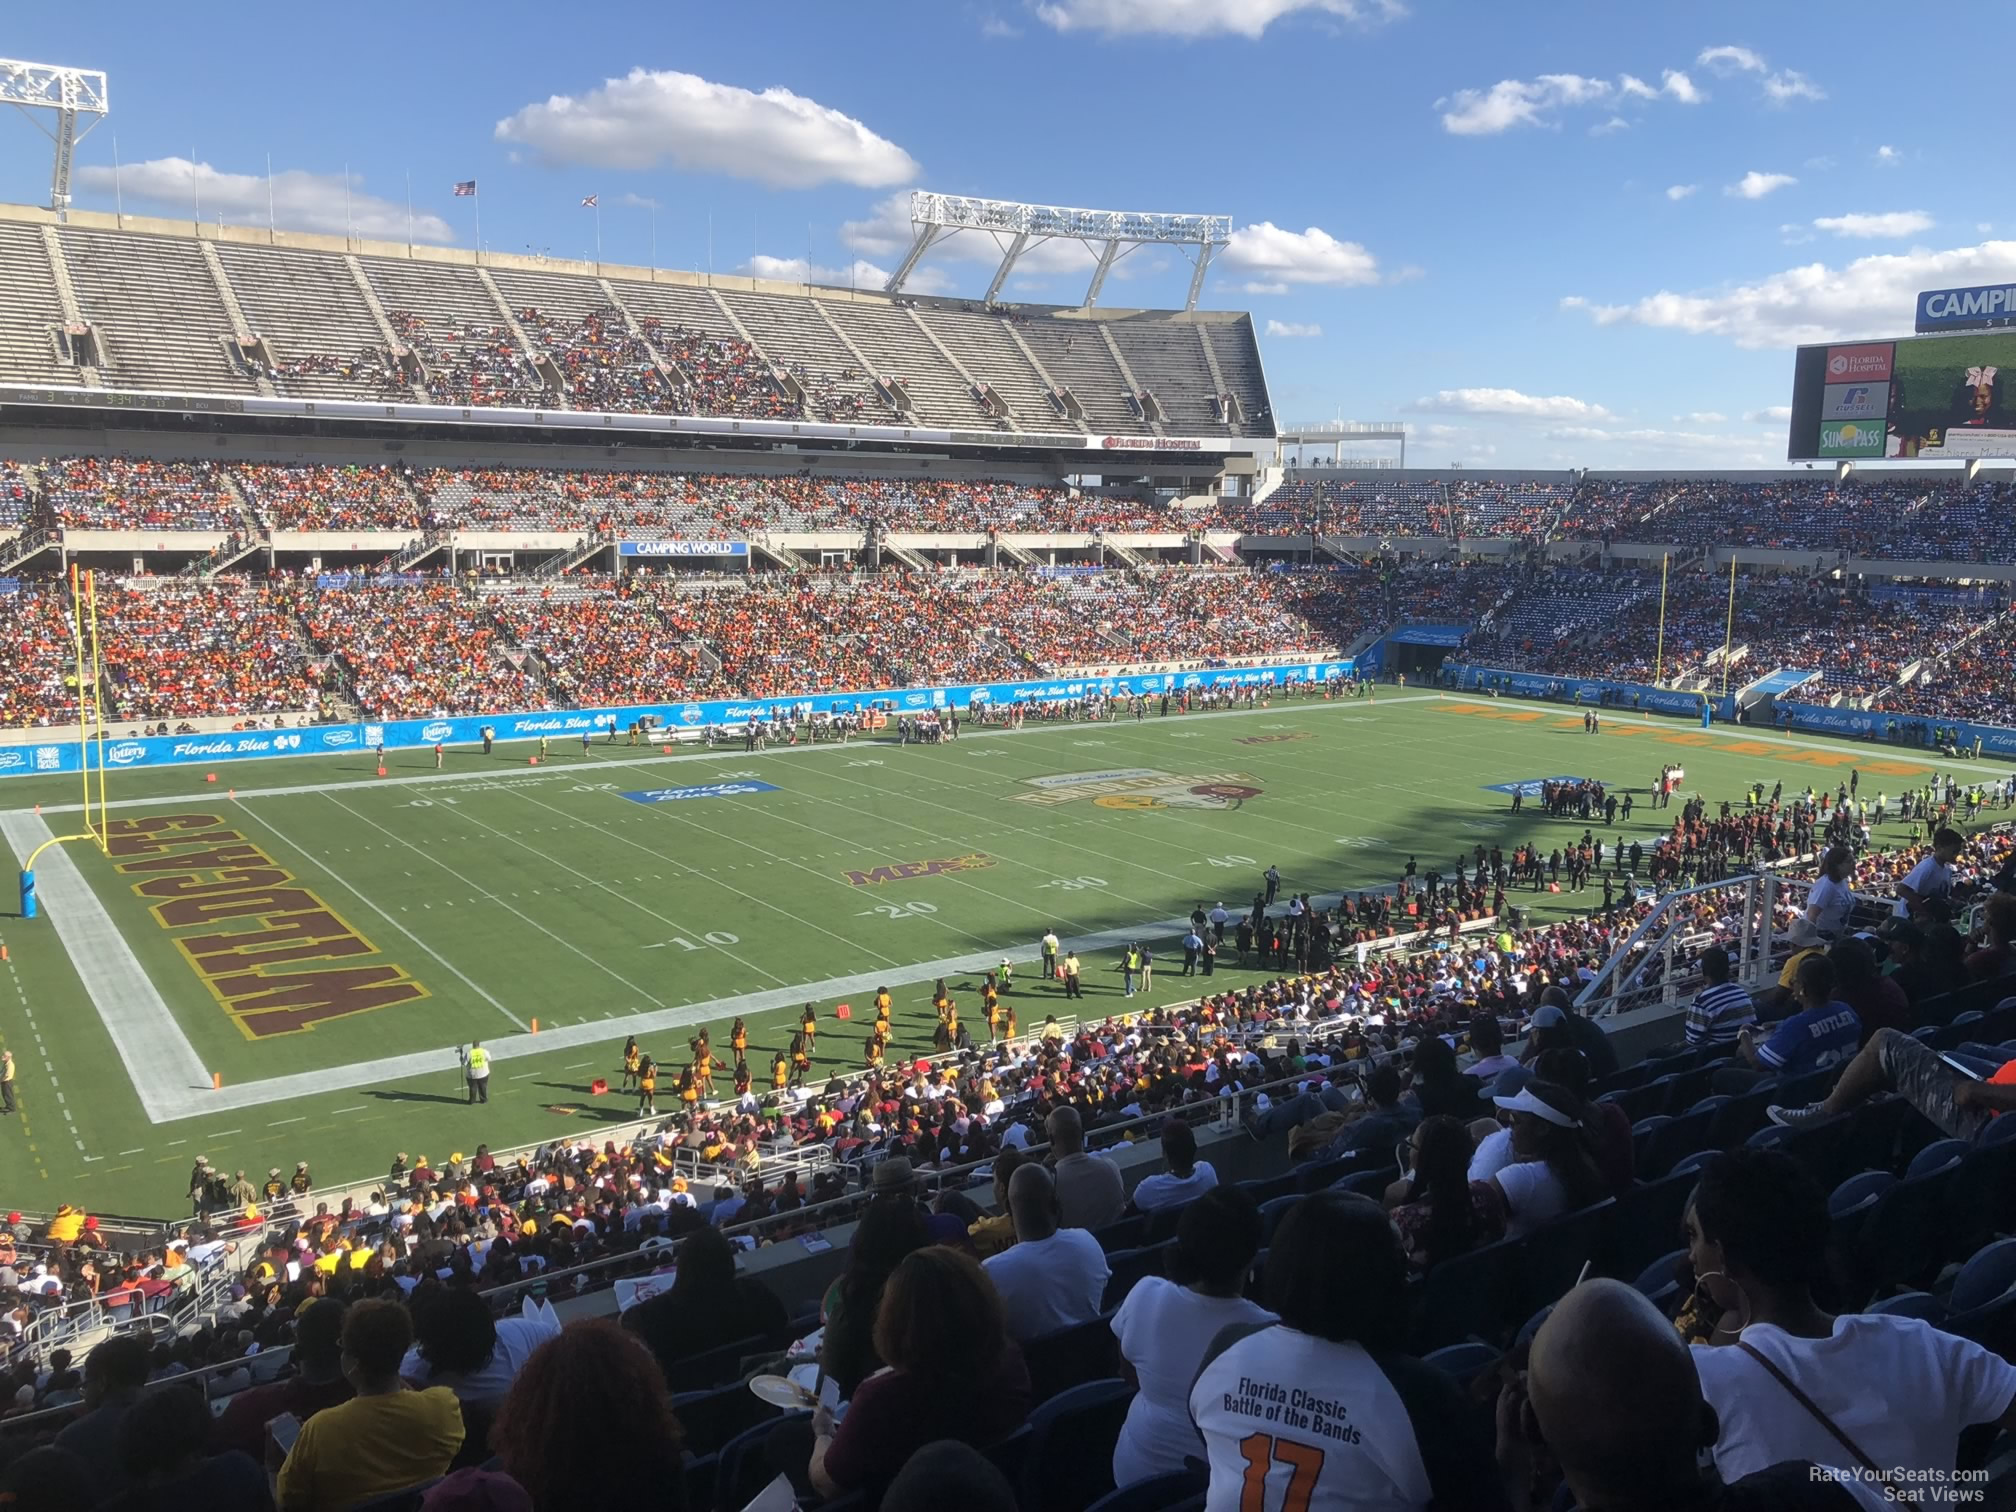 section p41, row m seat view  for football - camping world stadium